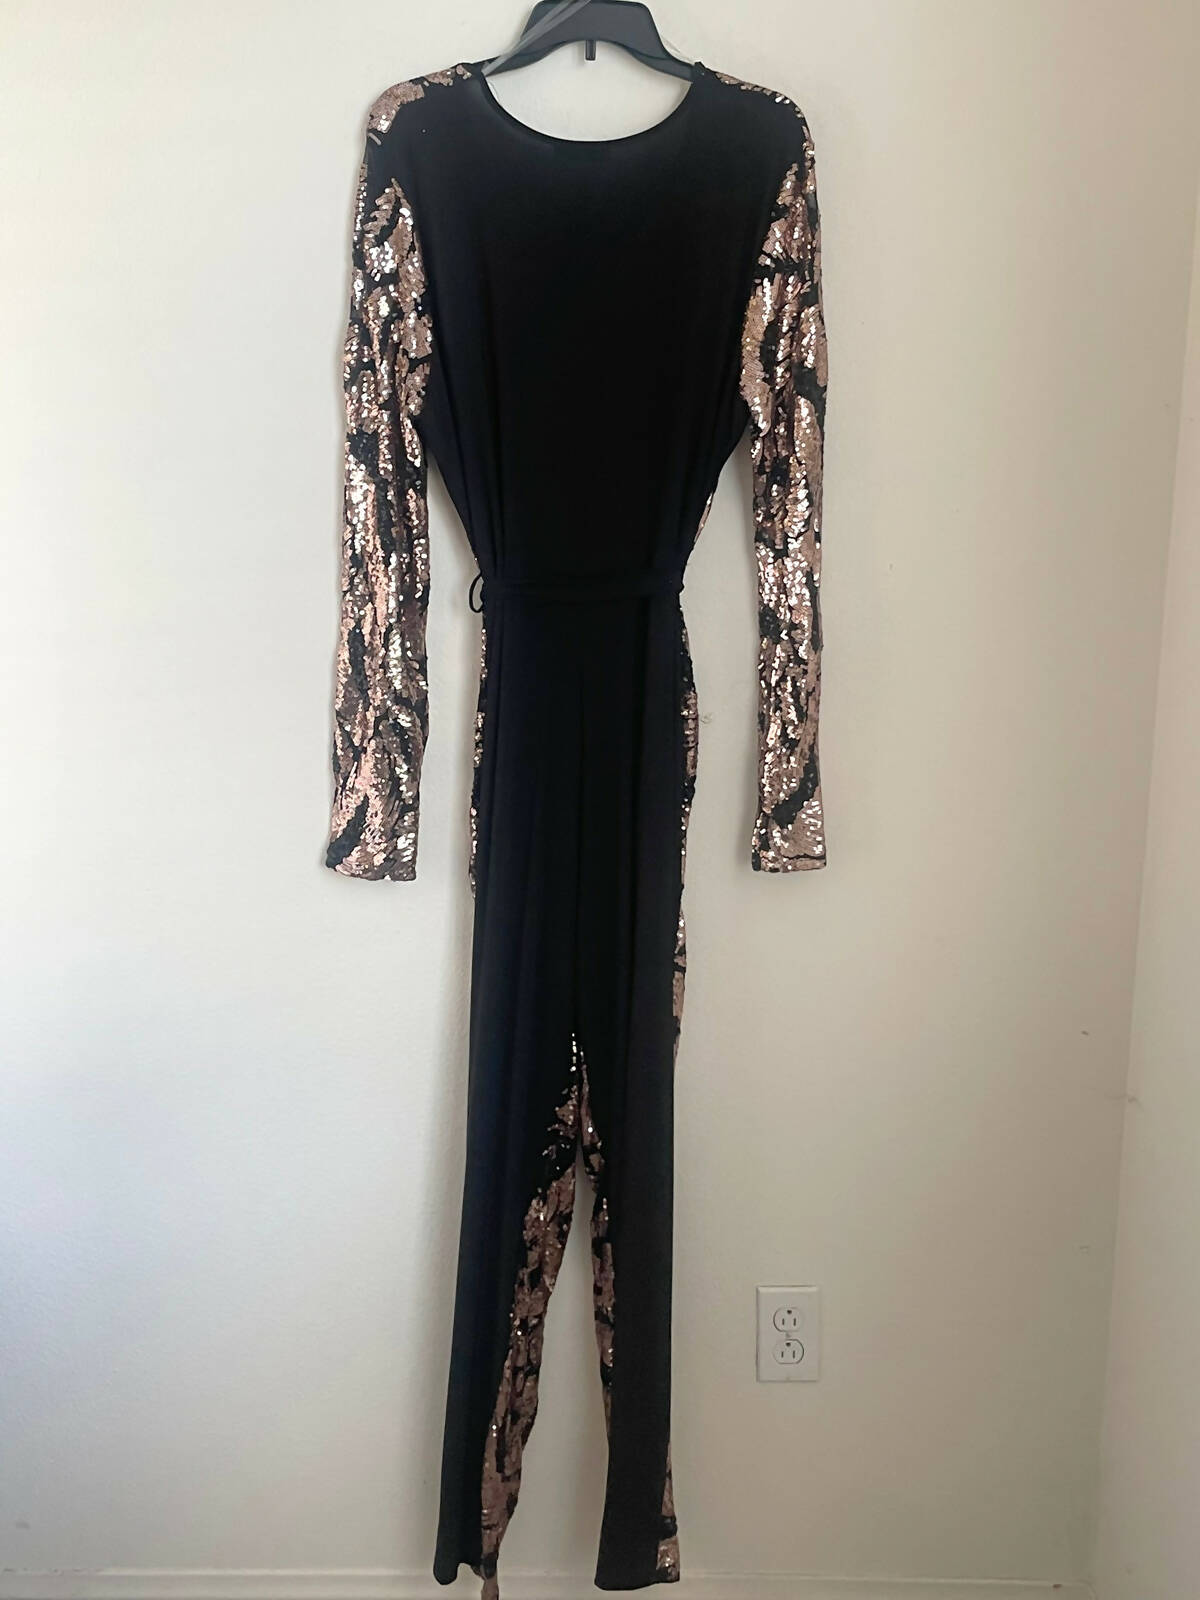 Bedazzled rose gold party jumpsuit